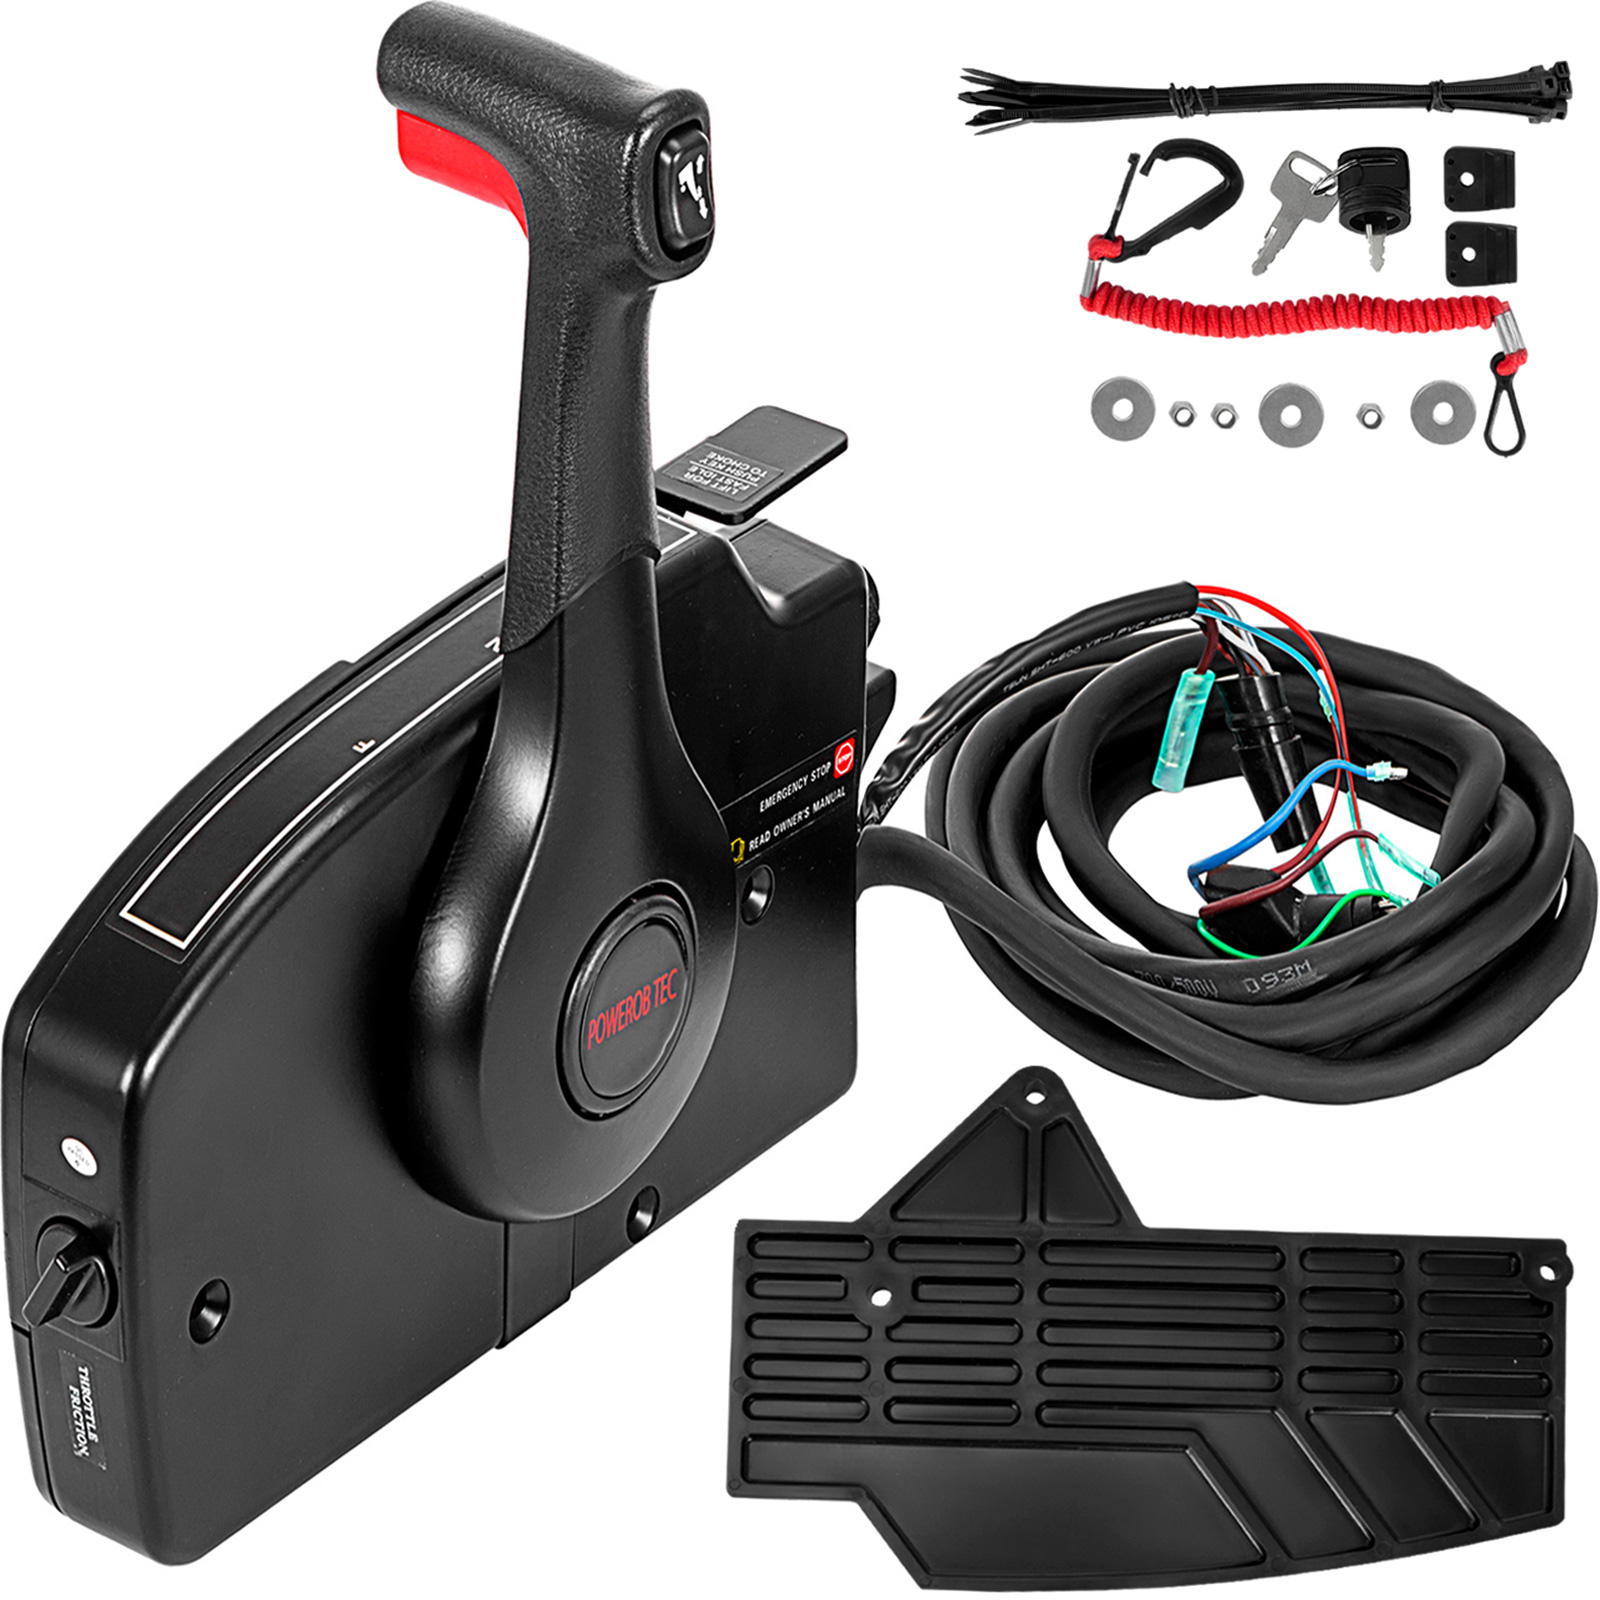 Boat Throttle Control,Side Control,Compatible with  Yamaha